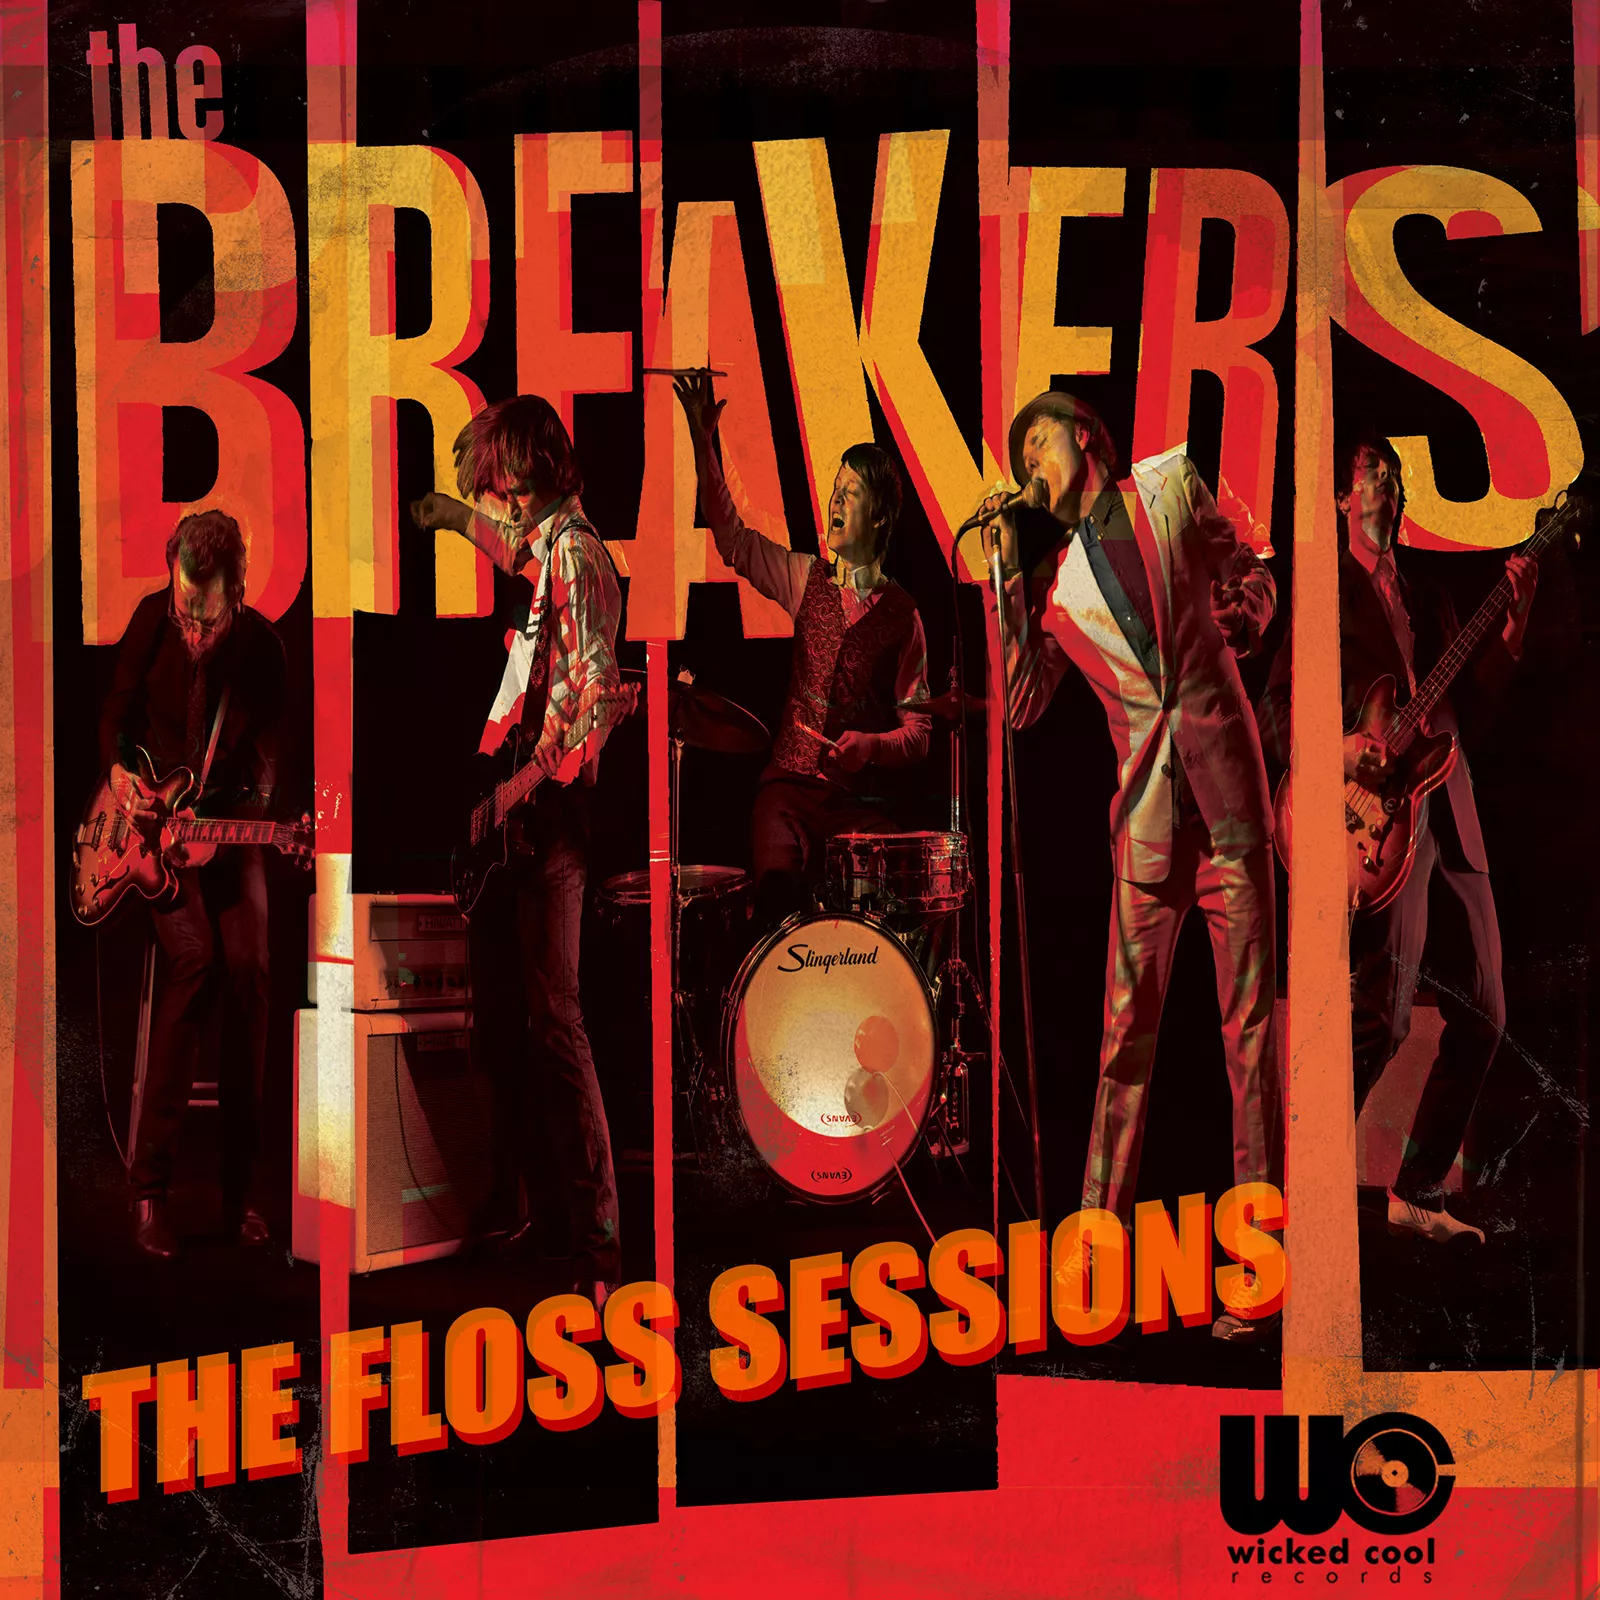 The Floss Sessions - The Breakers